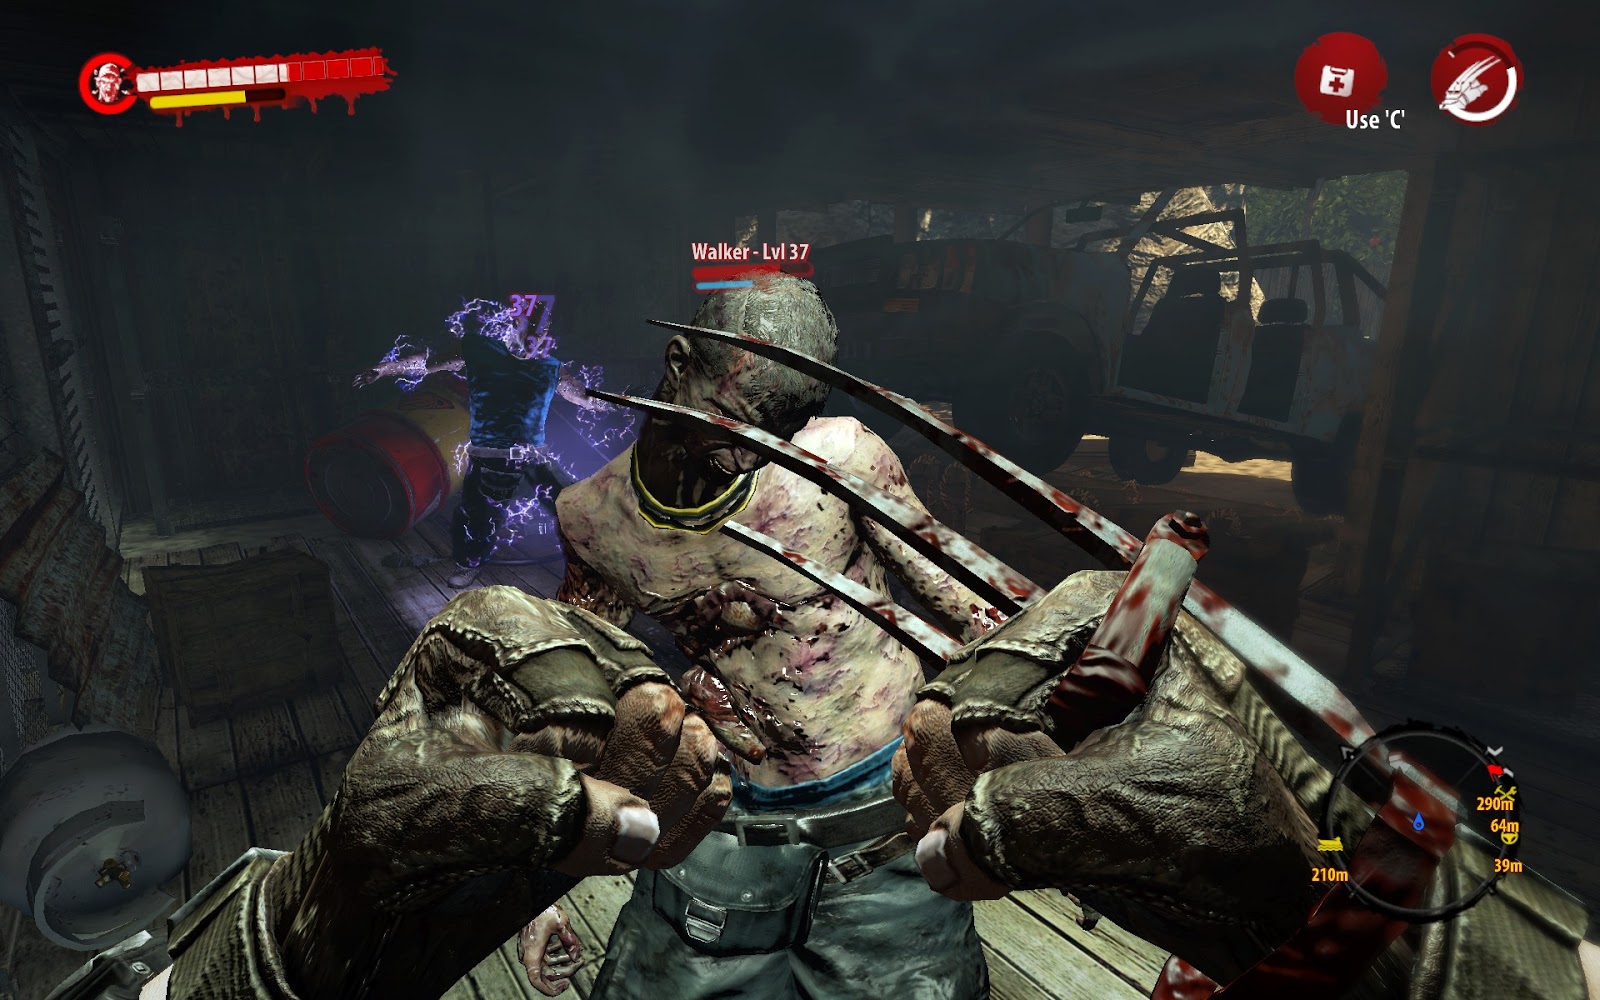 dead island pc game highly compressed download